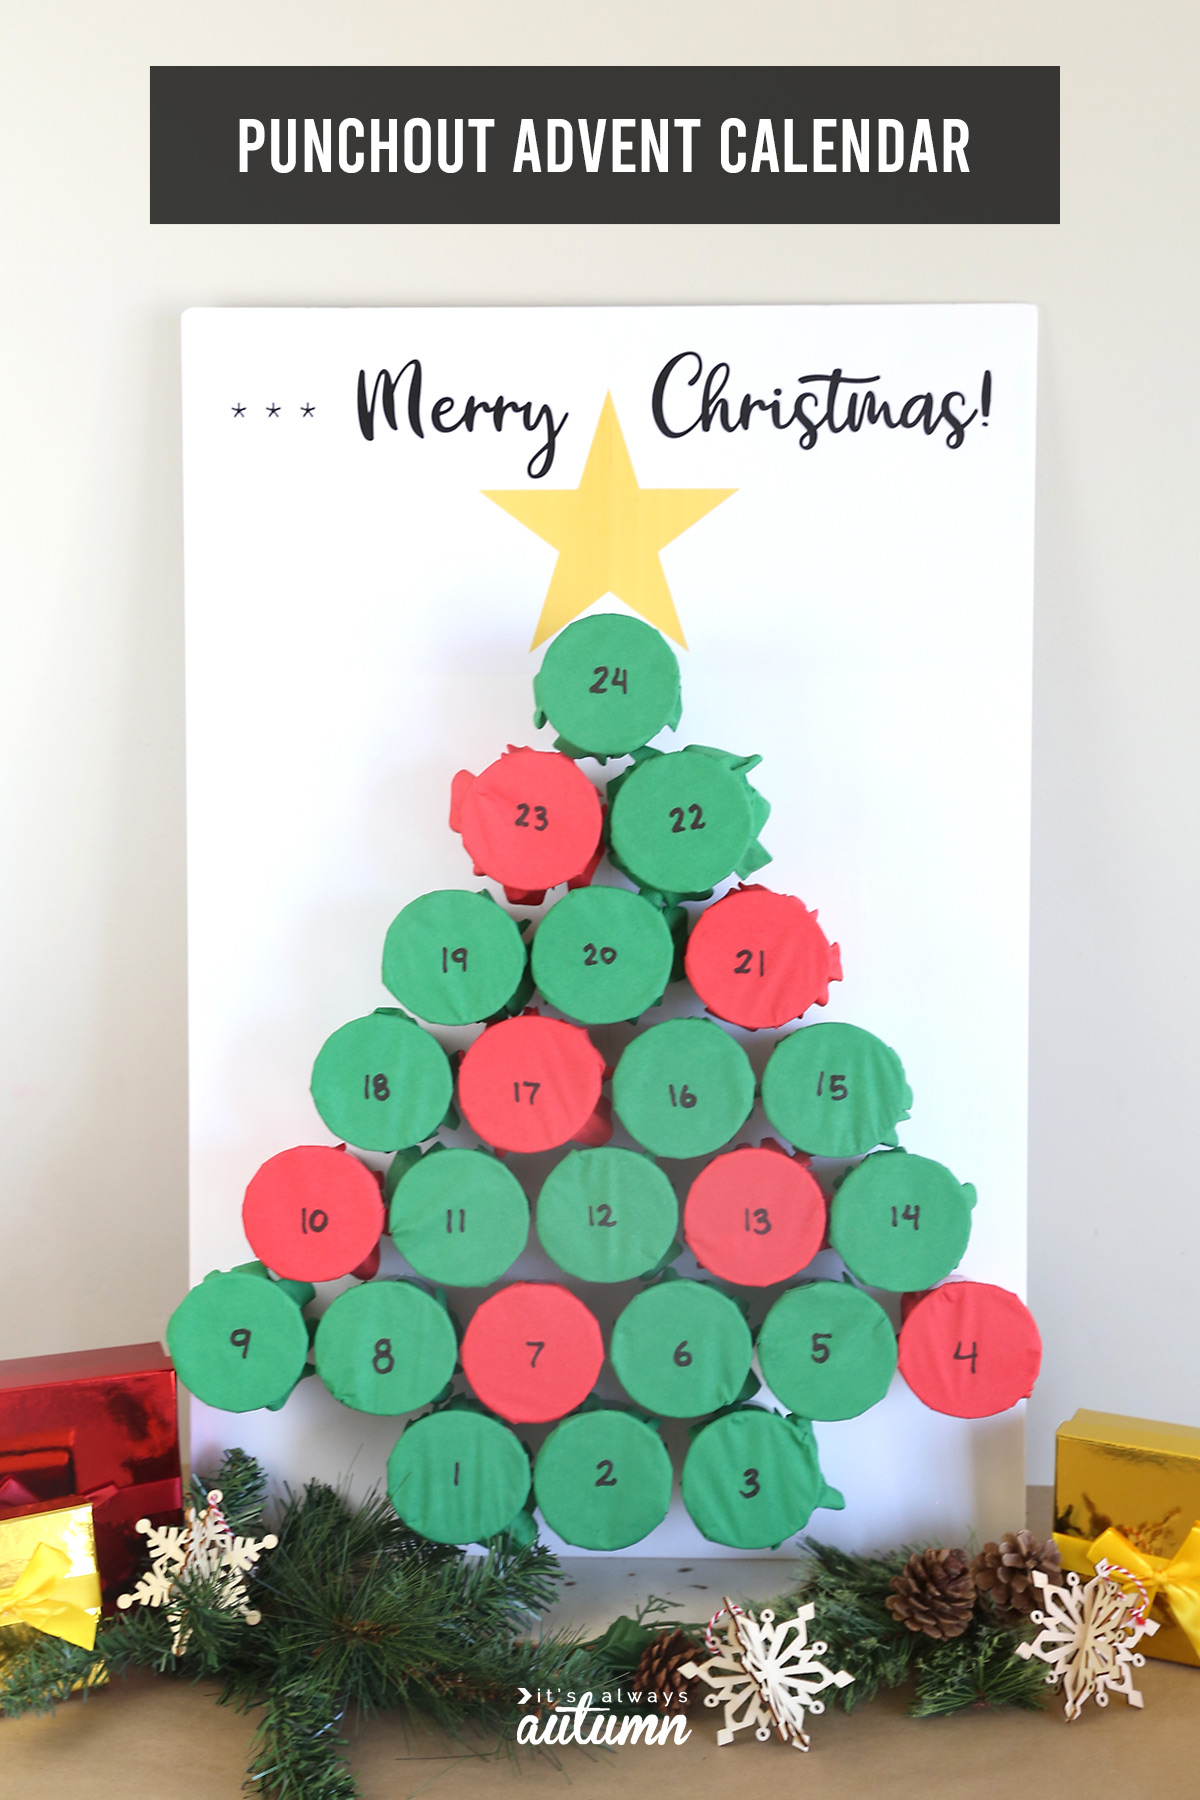 This punch out Advent Calendar is so much fun! It's easy to make and kids will love it!